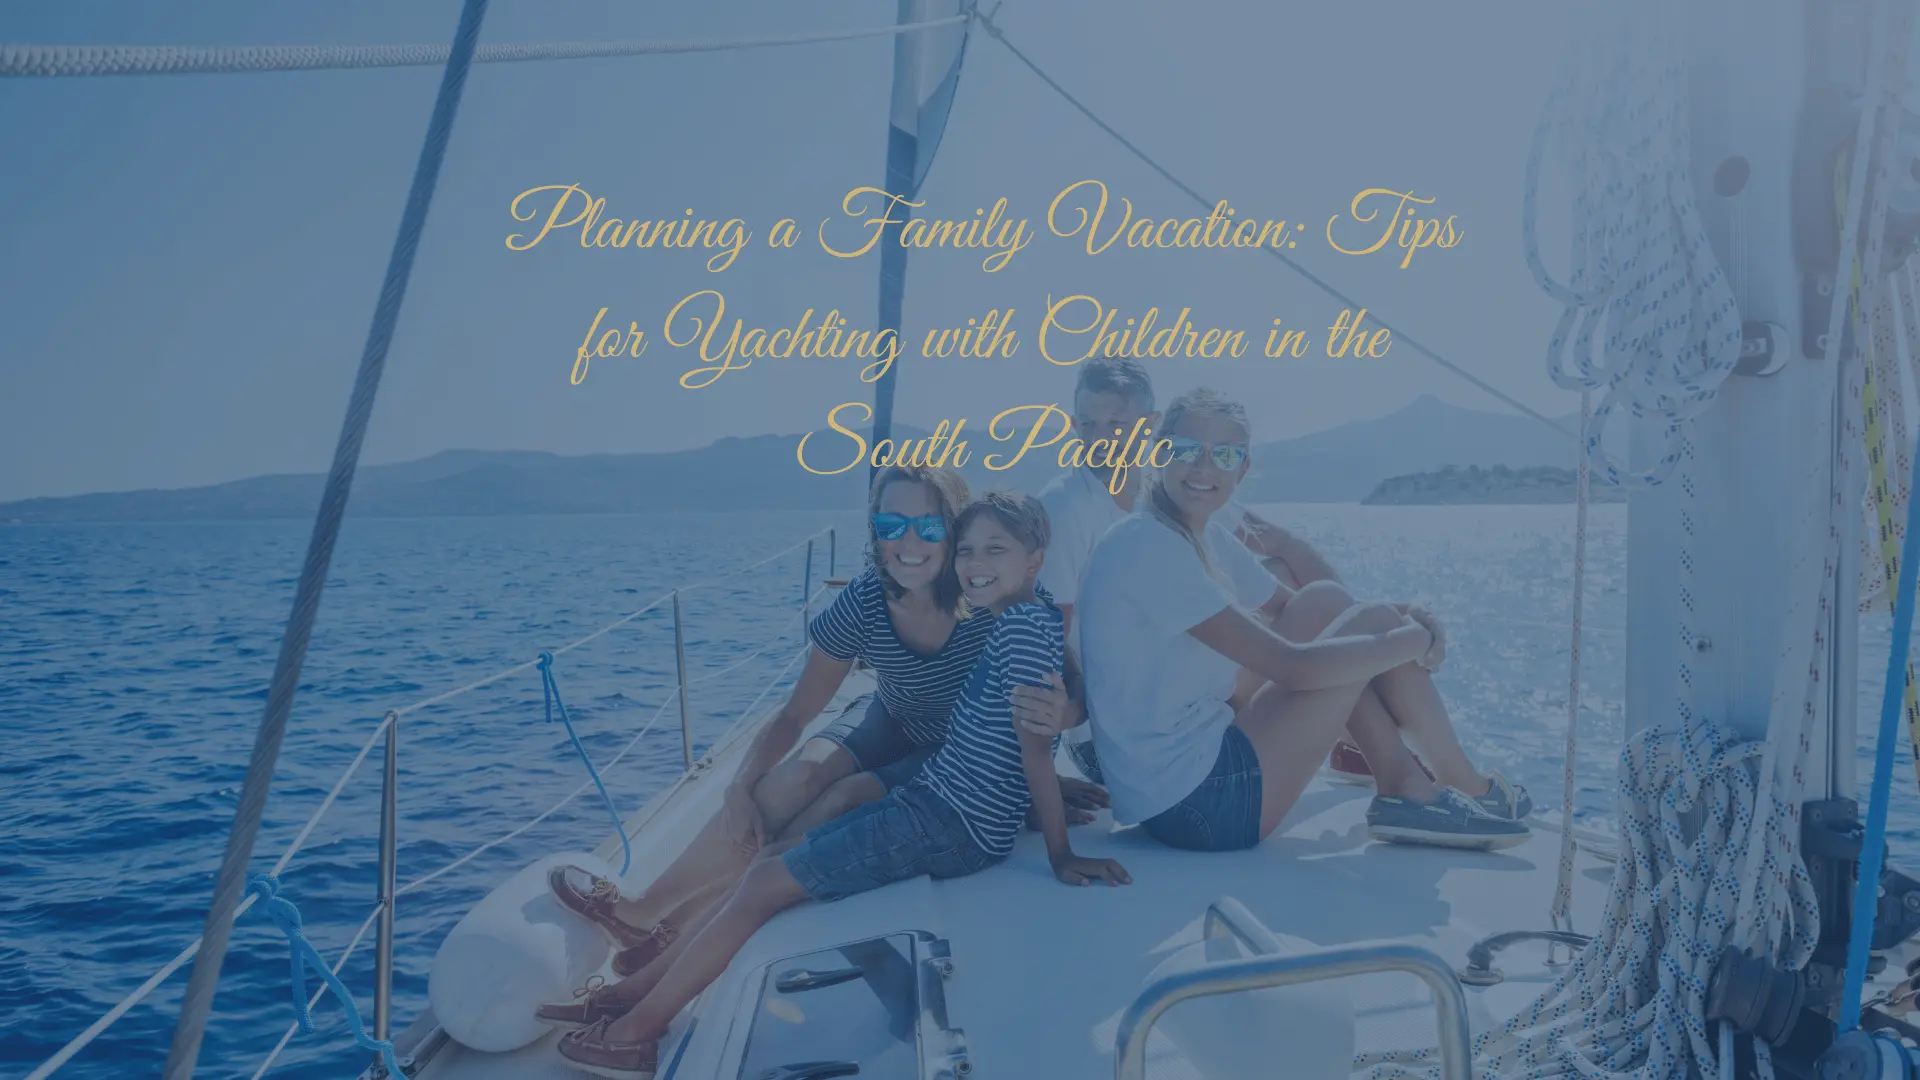 Planning a Family Vacation Tips for Yachting with Children in the South Pacific